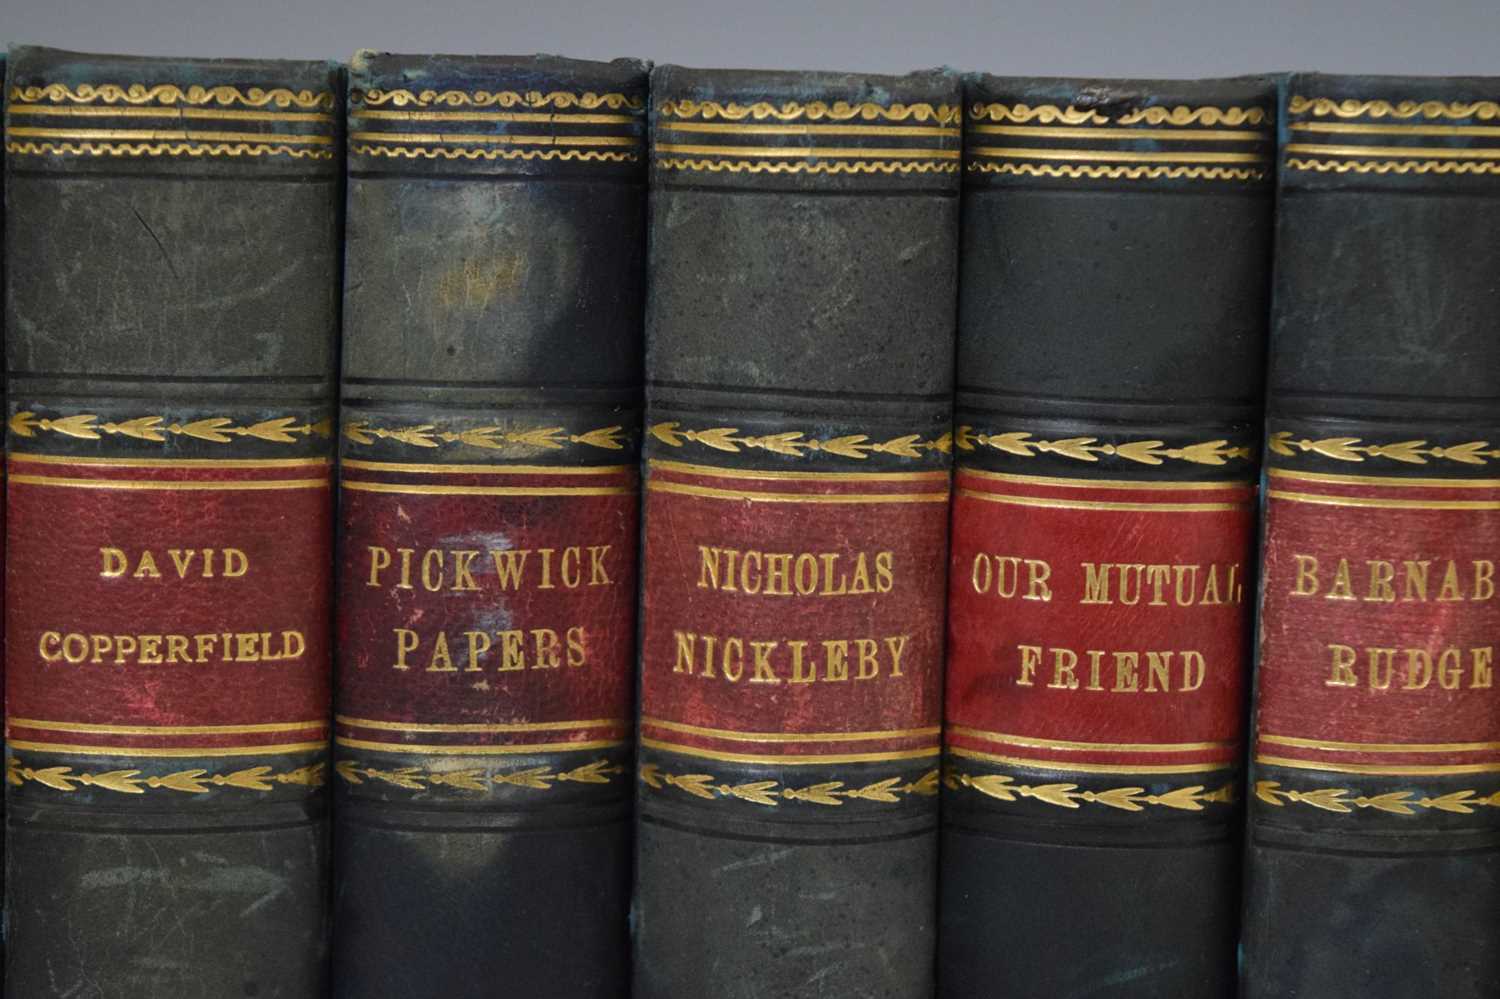 Circa 1867-1869 Dickens, Charles - 'The Charles Dickens Edition' complete set - Image 3 of 11